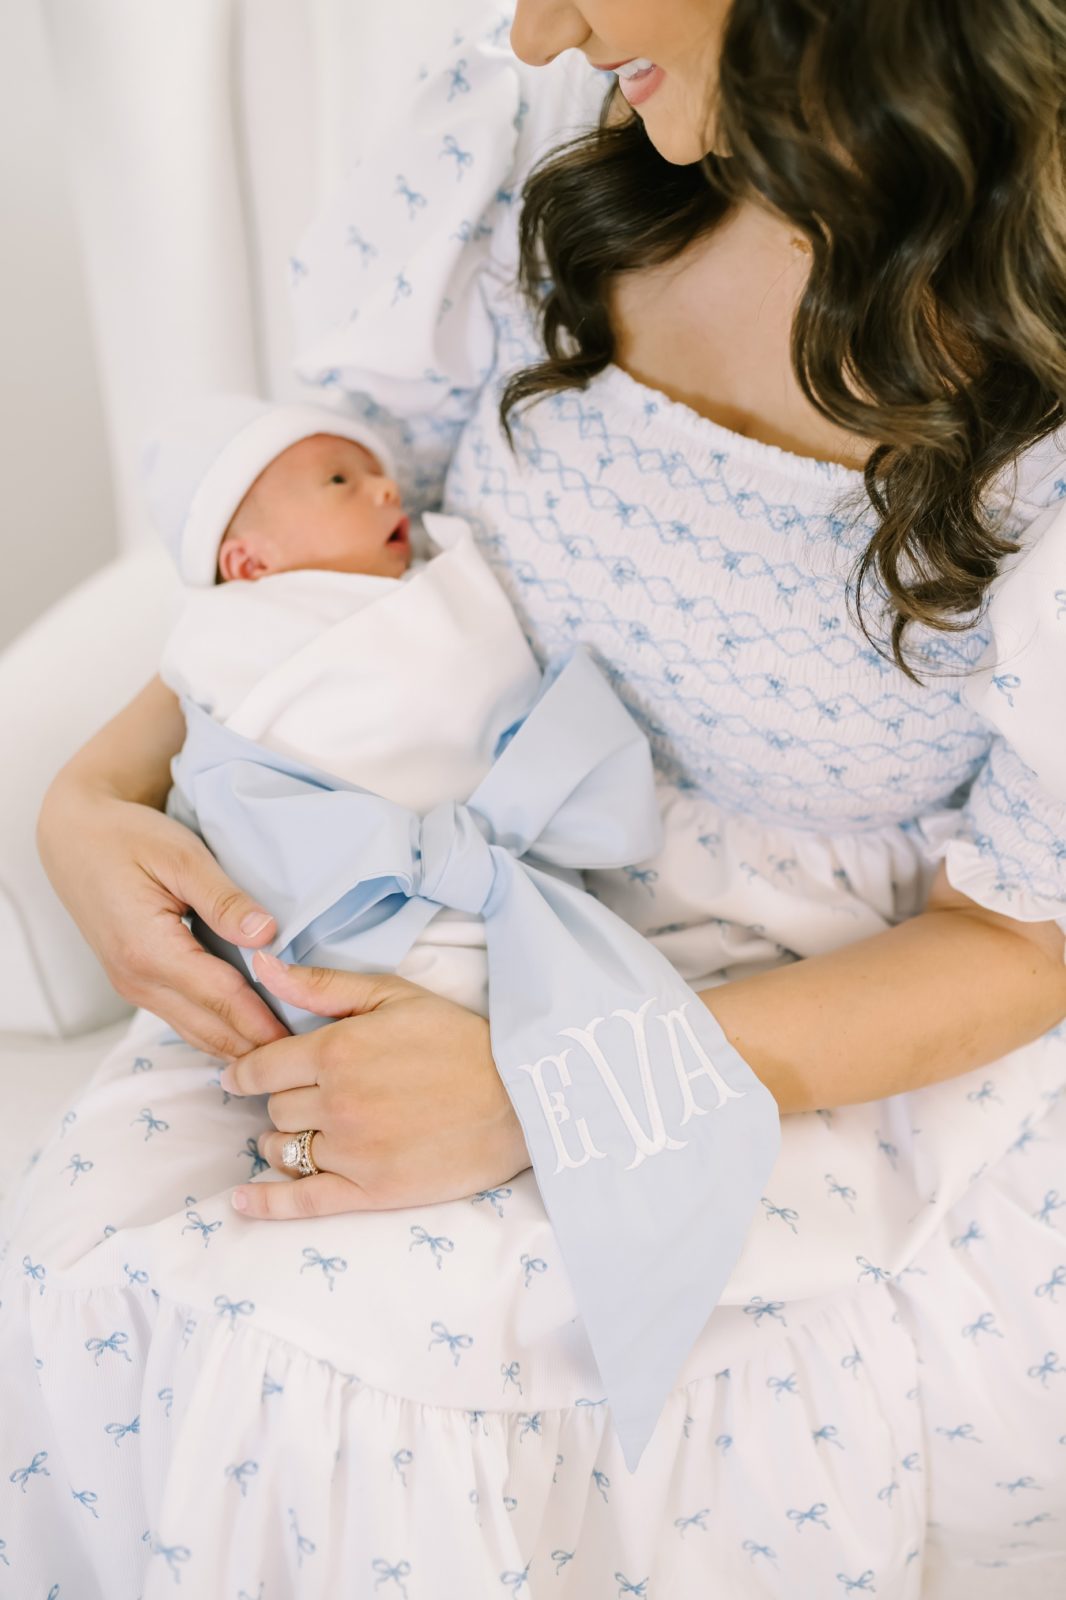 Detailed portrait of a mother holding her newborn baby by Christina Elliott Photography. close-up baby portrait smocked woman dress #ChristinaElliottPhotography #ChristinaElliottNewborns #HoustonLifestyleNewborns #HoustonFamilyPhotographer